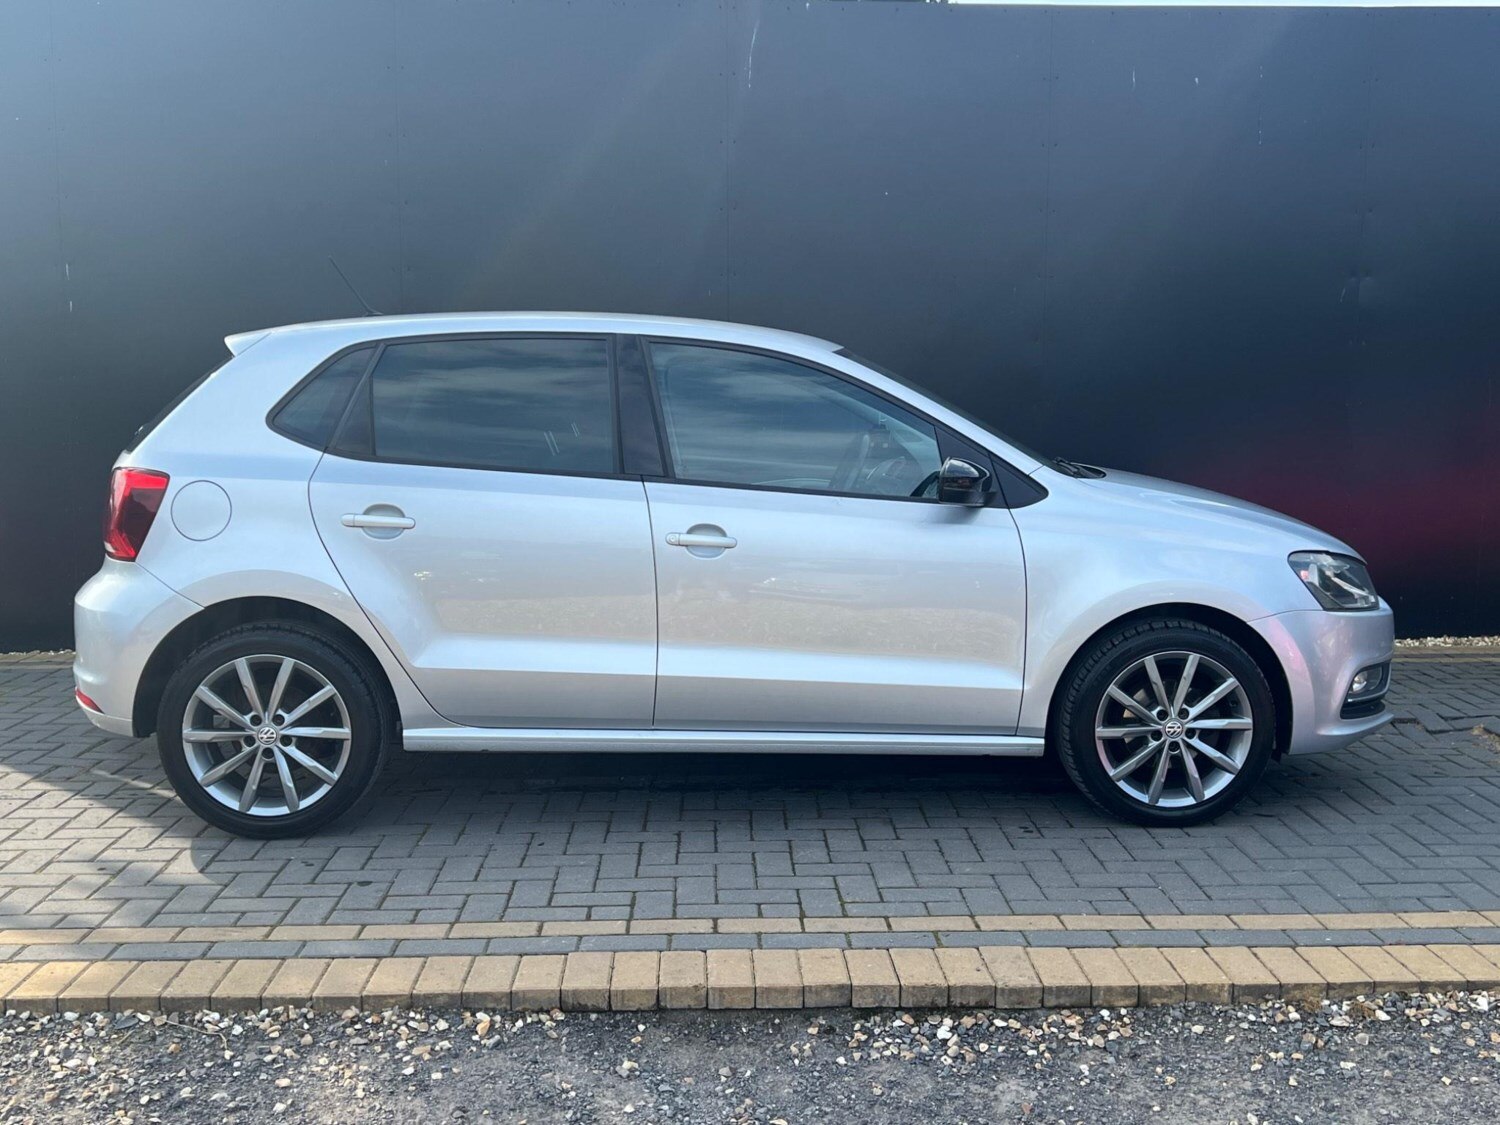 Volkswagen Polo (5) 1.4 TDI 90 Cup Bluemotion Technology